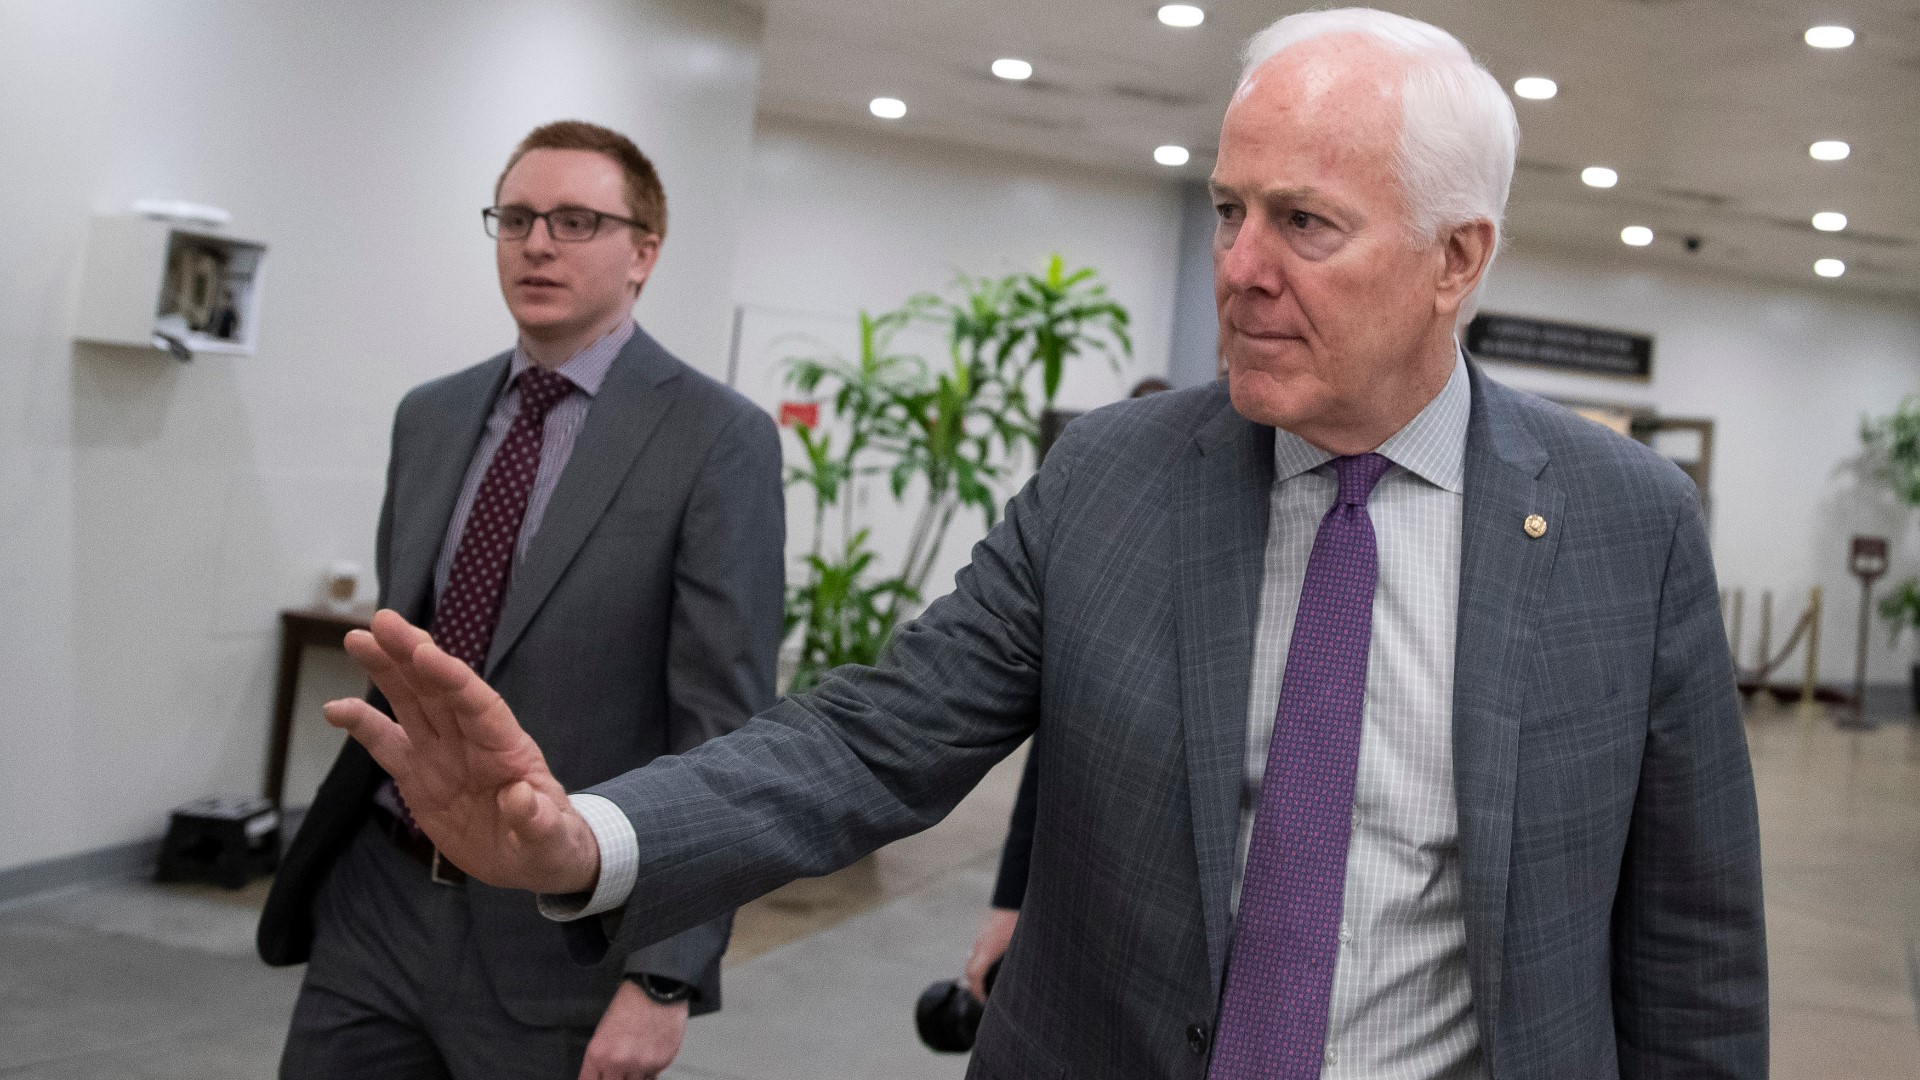 Cornyn touched on the possibility of another $1,200 coronavirus relief payment to Americans.